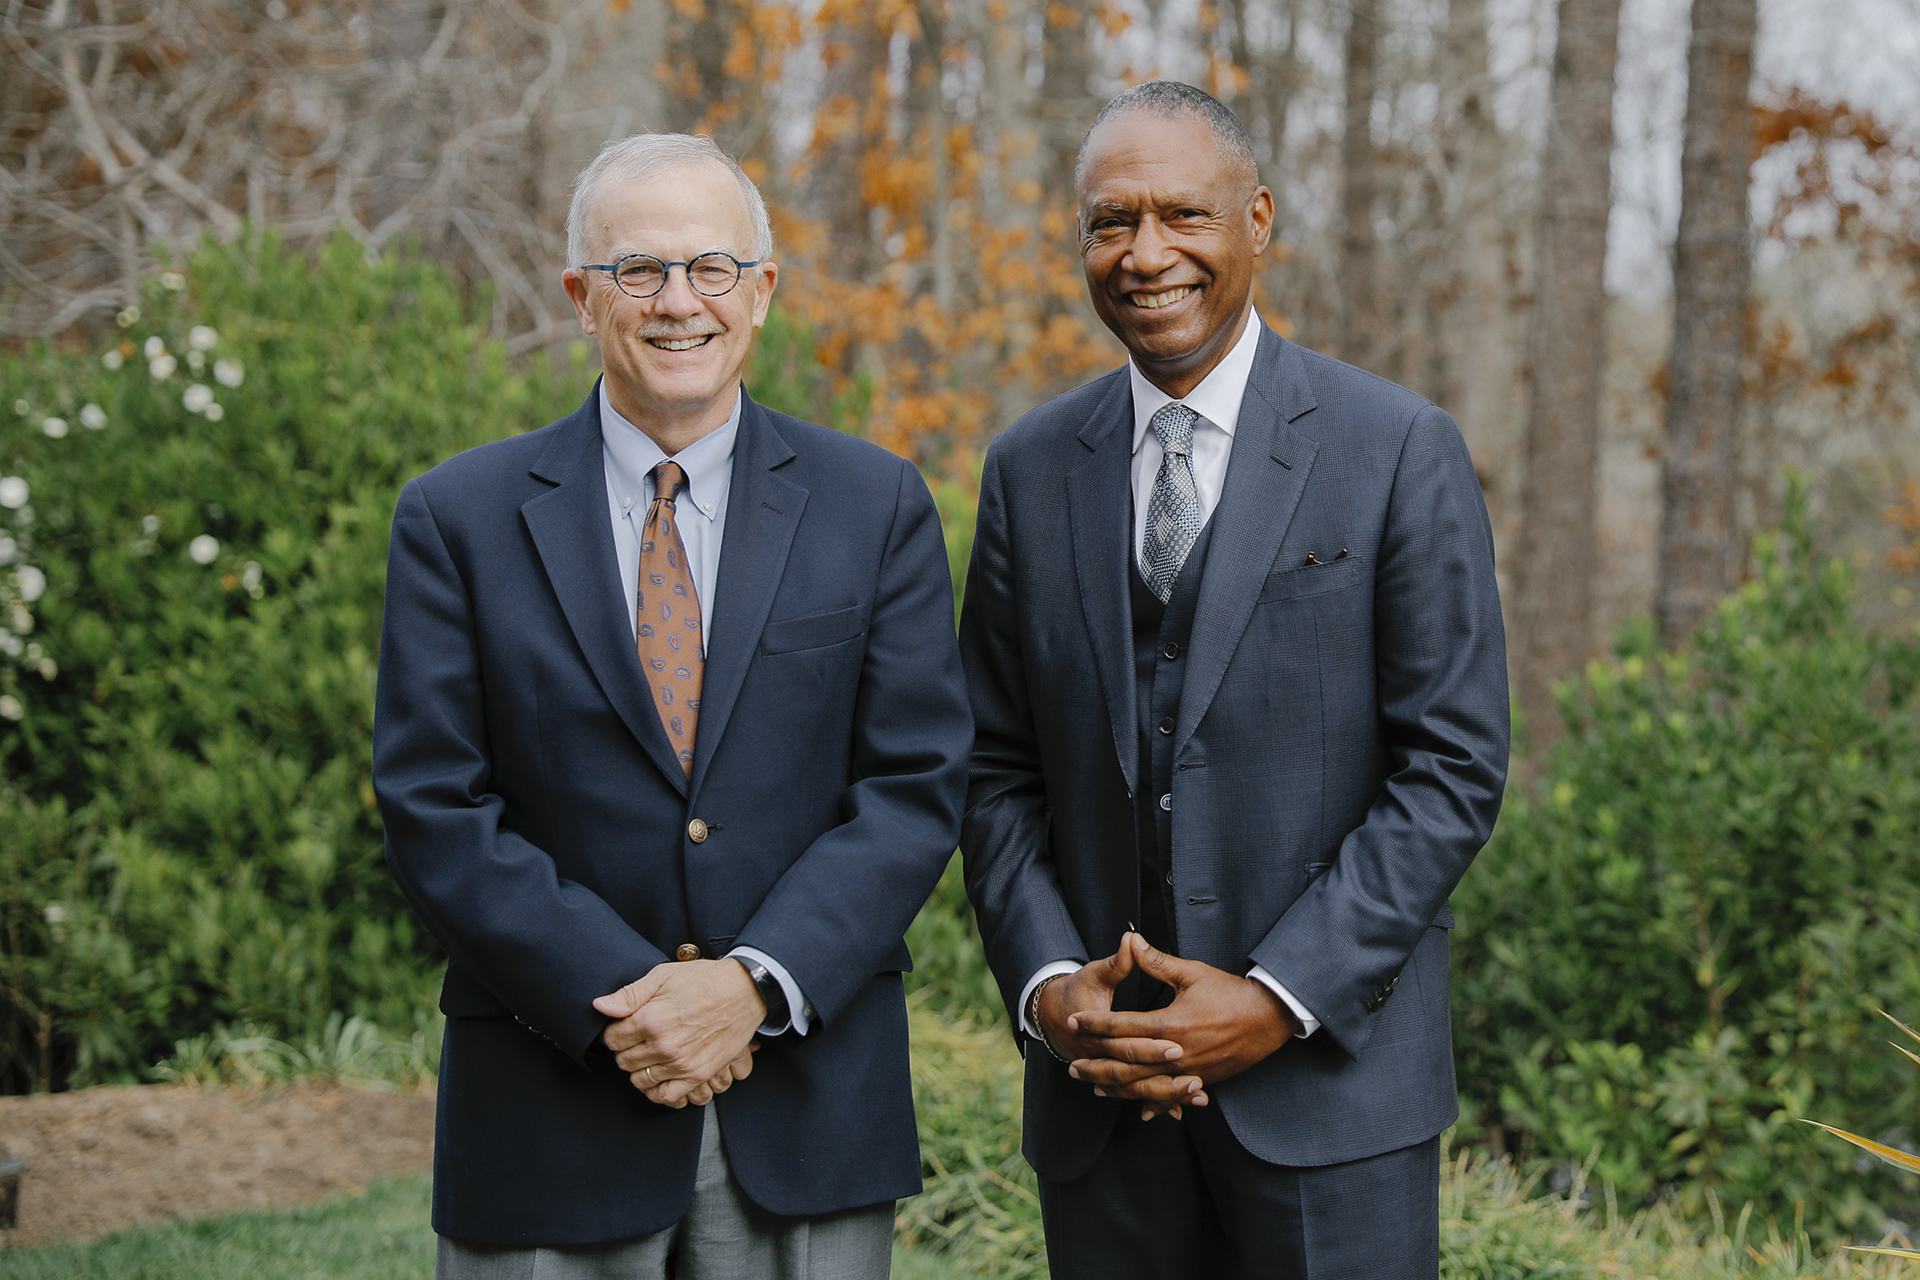 Dean Mike Smith stands beside LGFCU CEO Maurice Smith outside among green trees and bushes on the UNC-Chapel Hill campus.